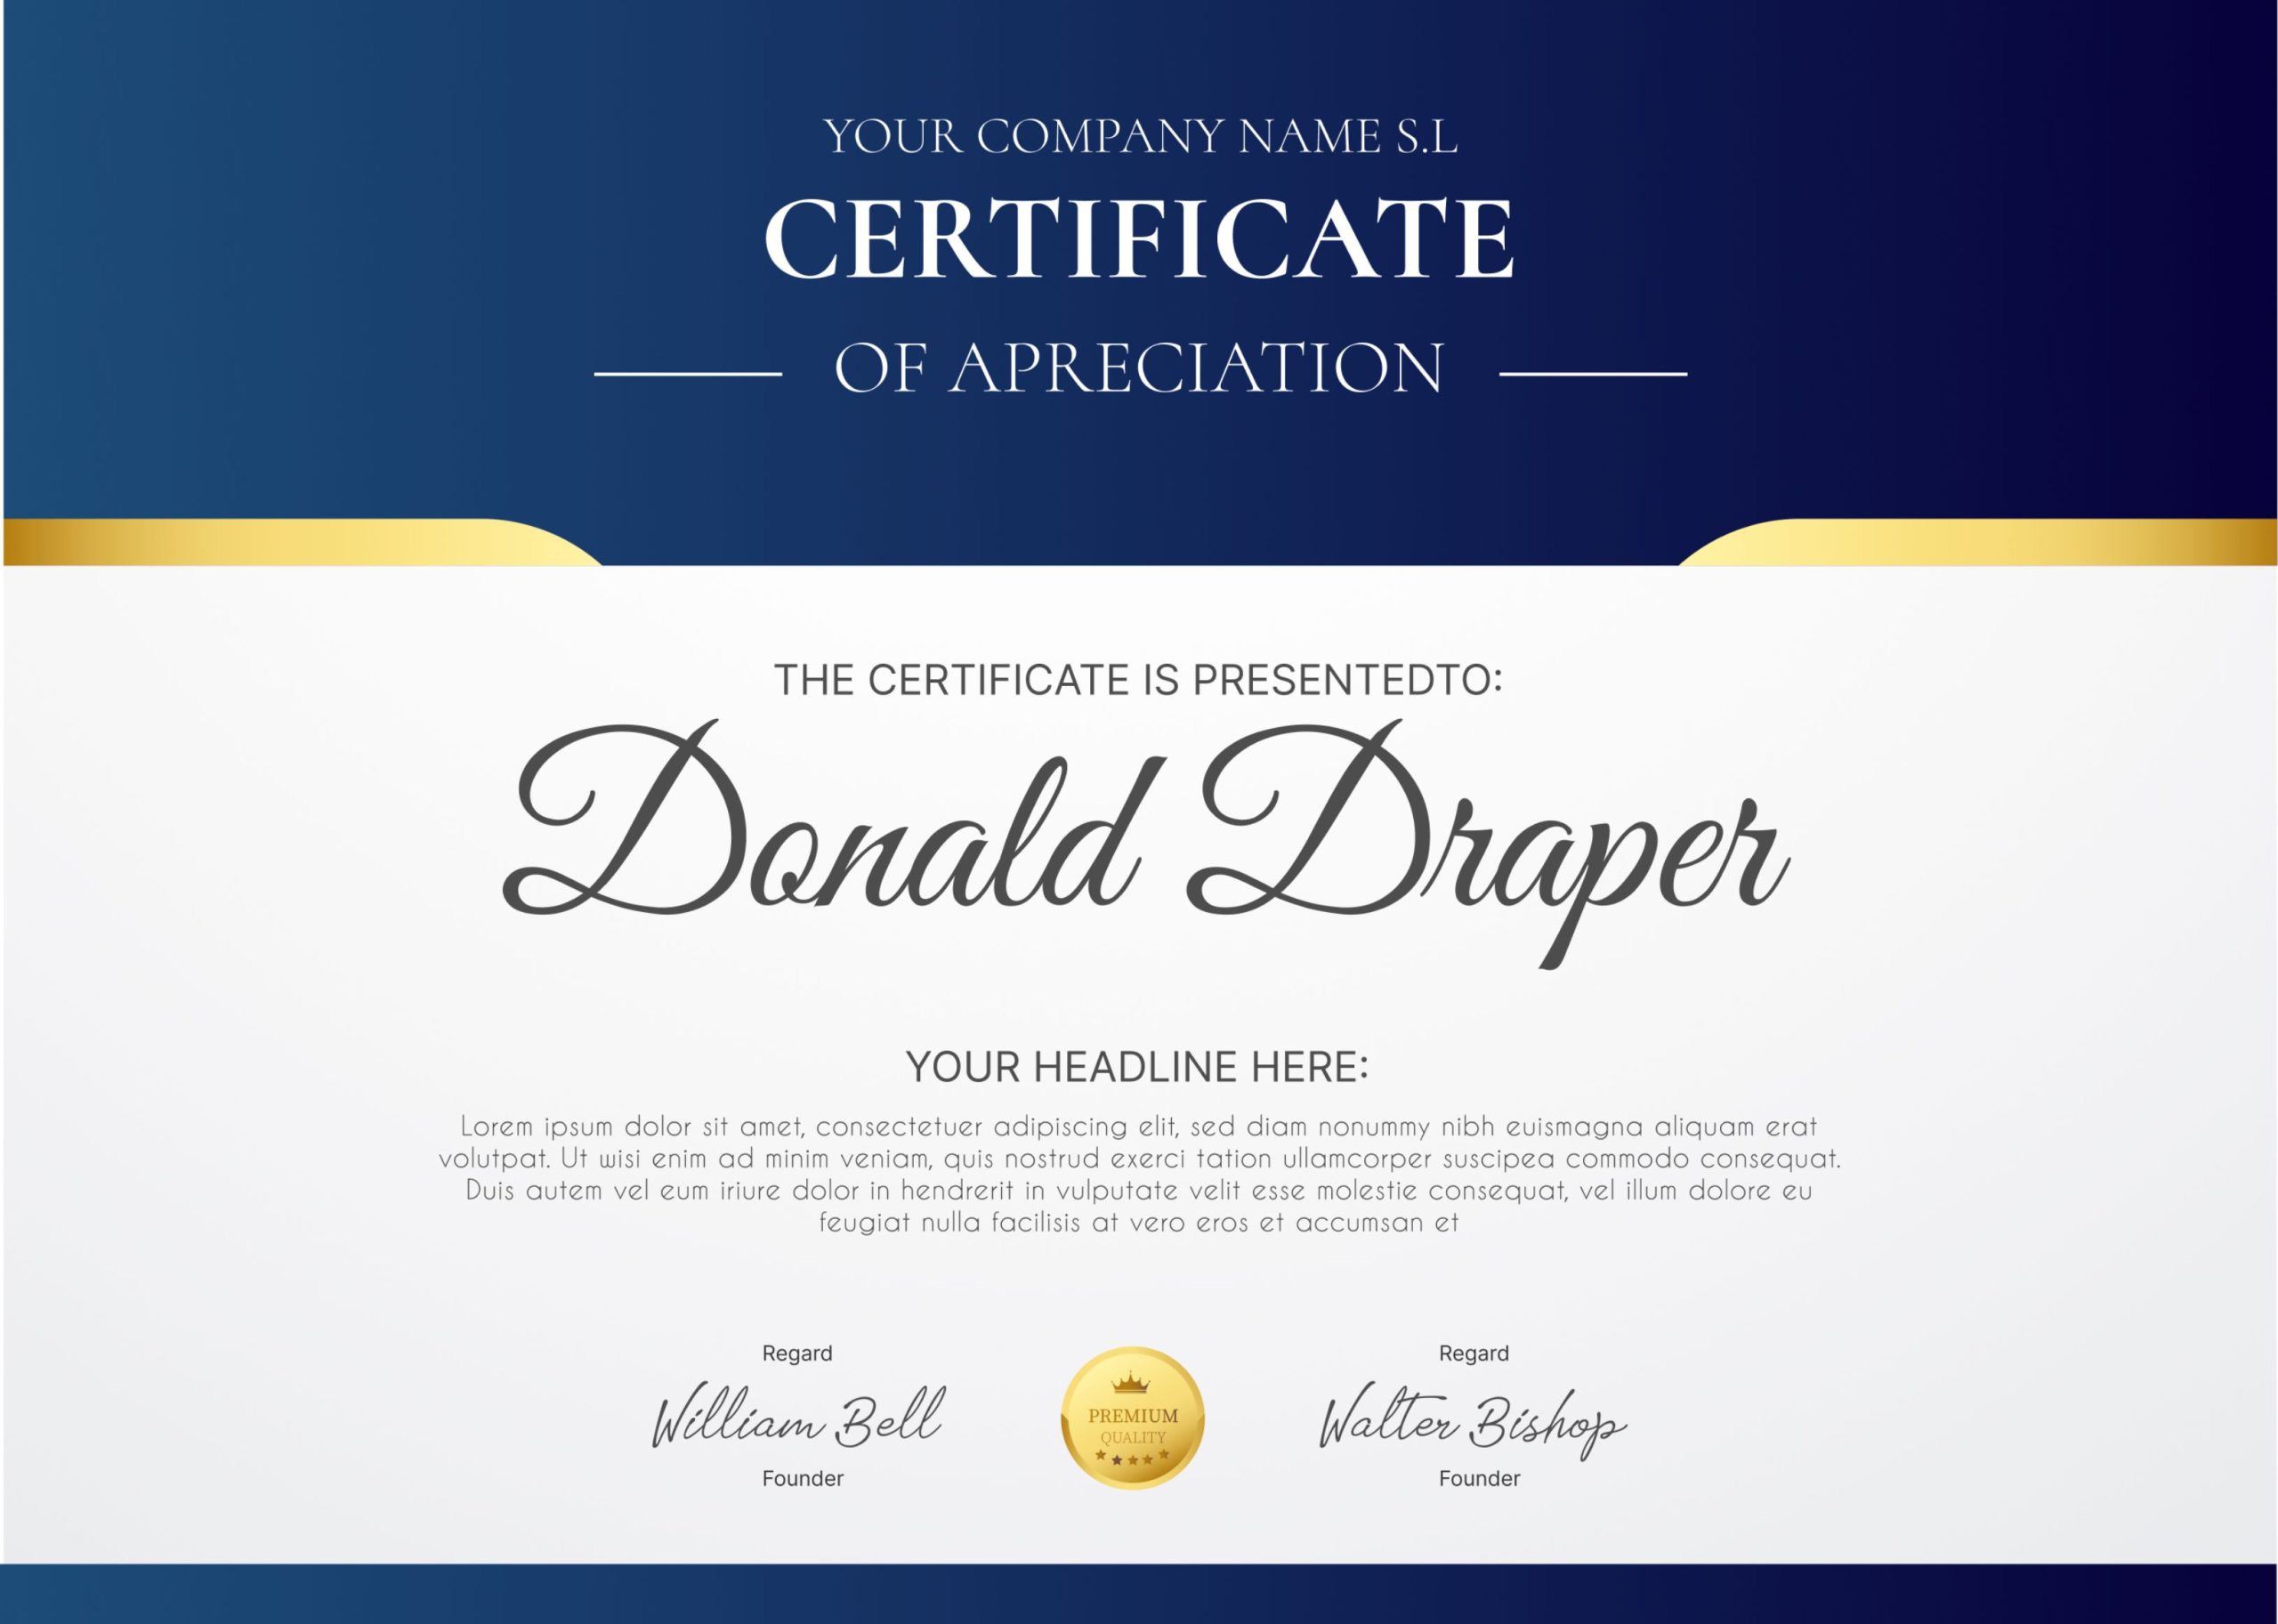 Blue and Gold Classic Corporate Certificate of Appreciation Examples